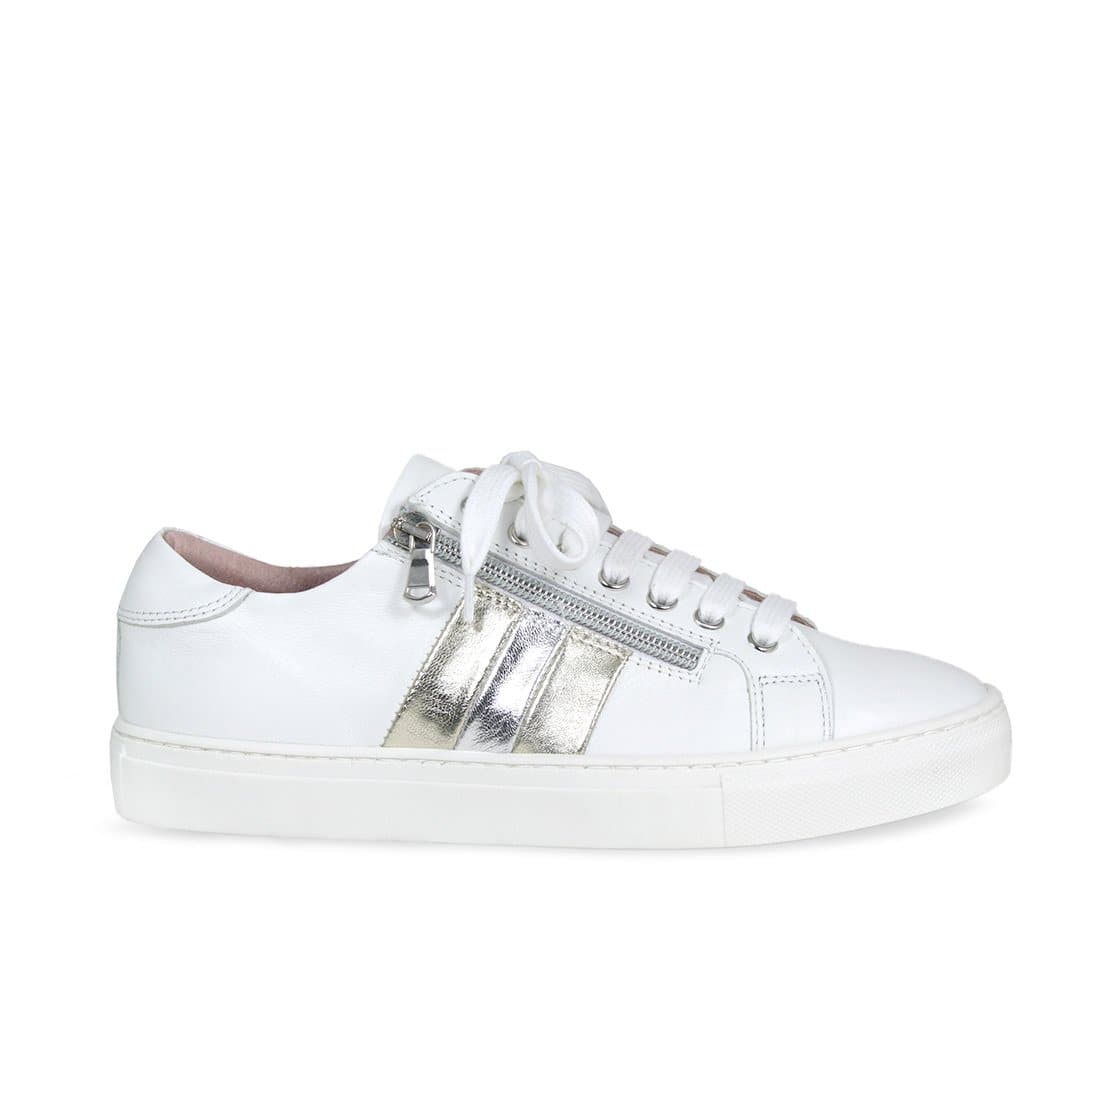 Sprint: White Leather & Metallic - Sporty Trainers for Bunions | Sole Bliss